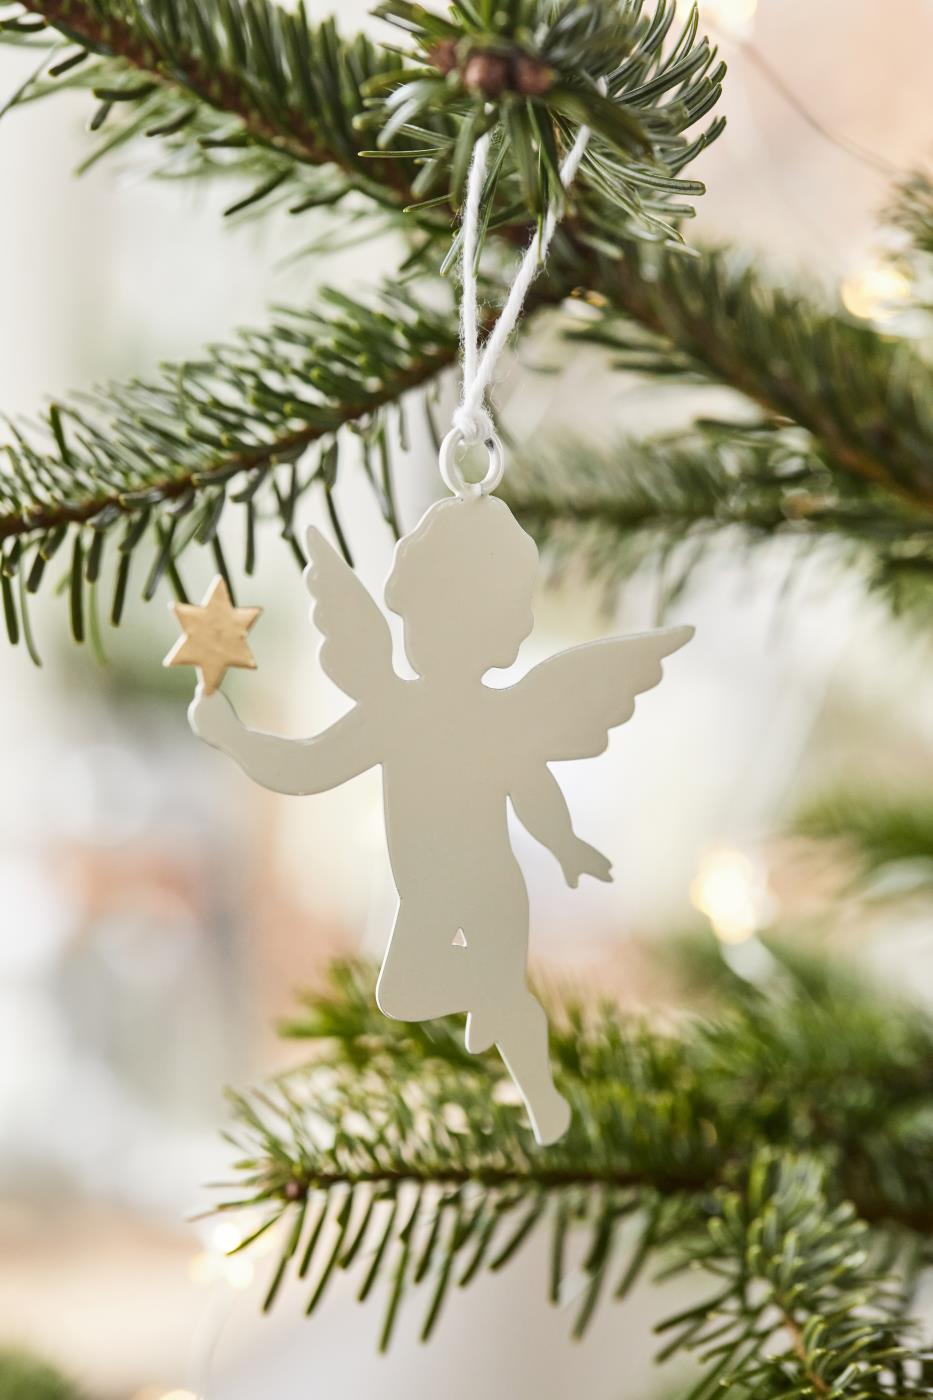 Nostalgic Handmade Christmas Angel with Star for sale at Source